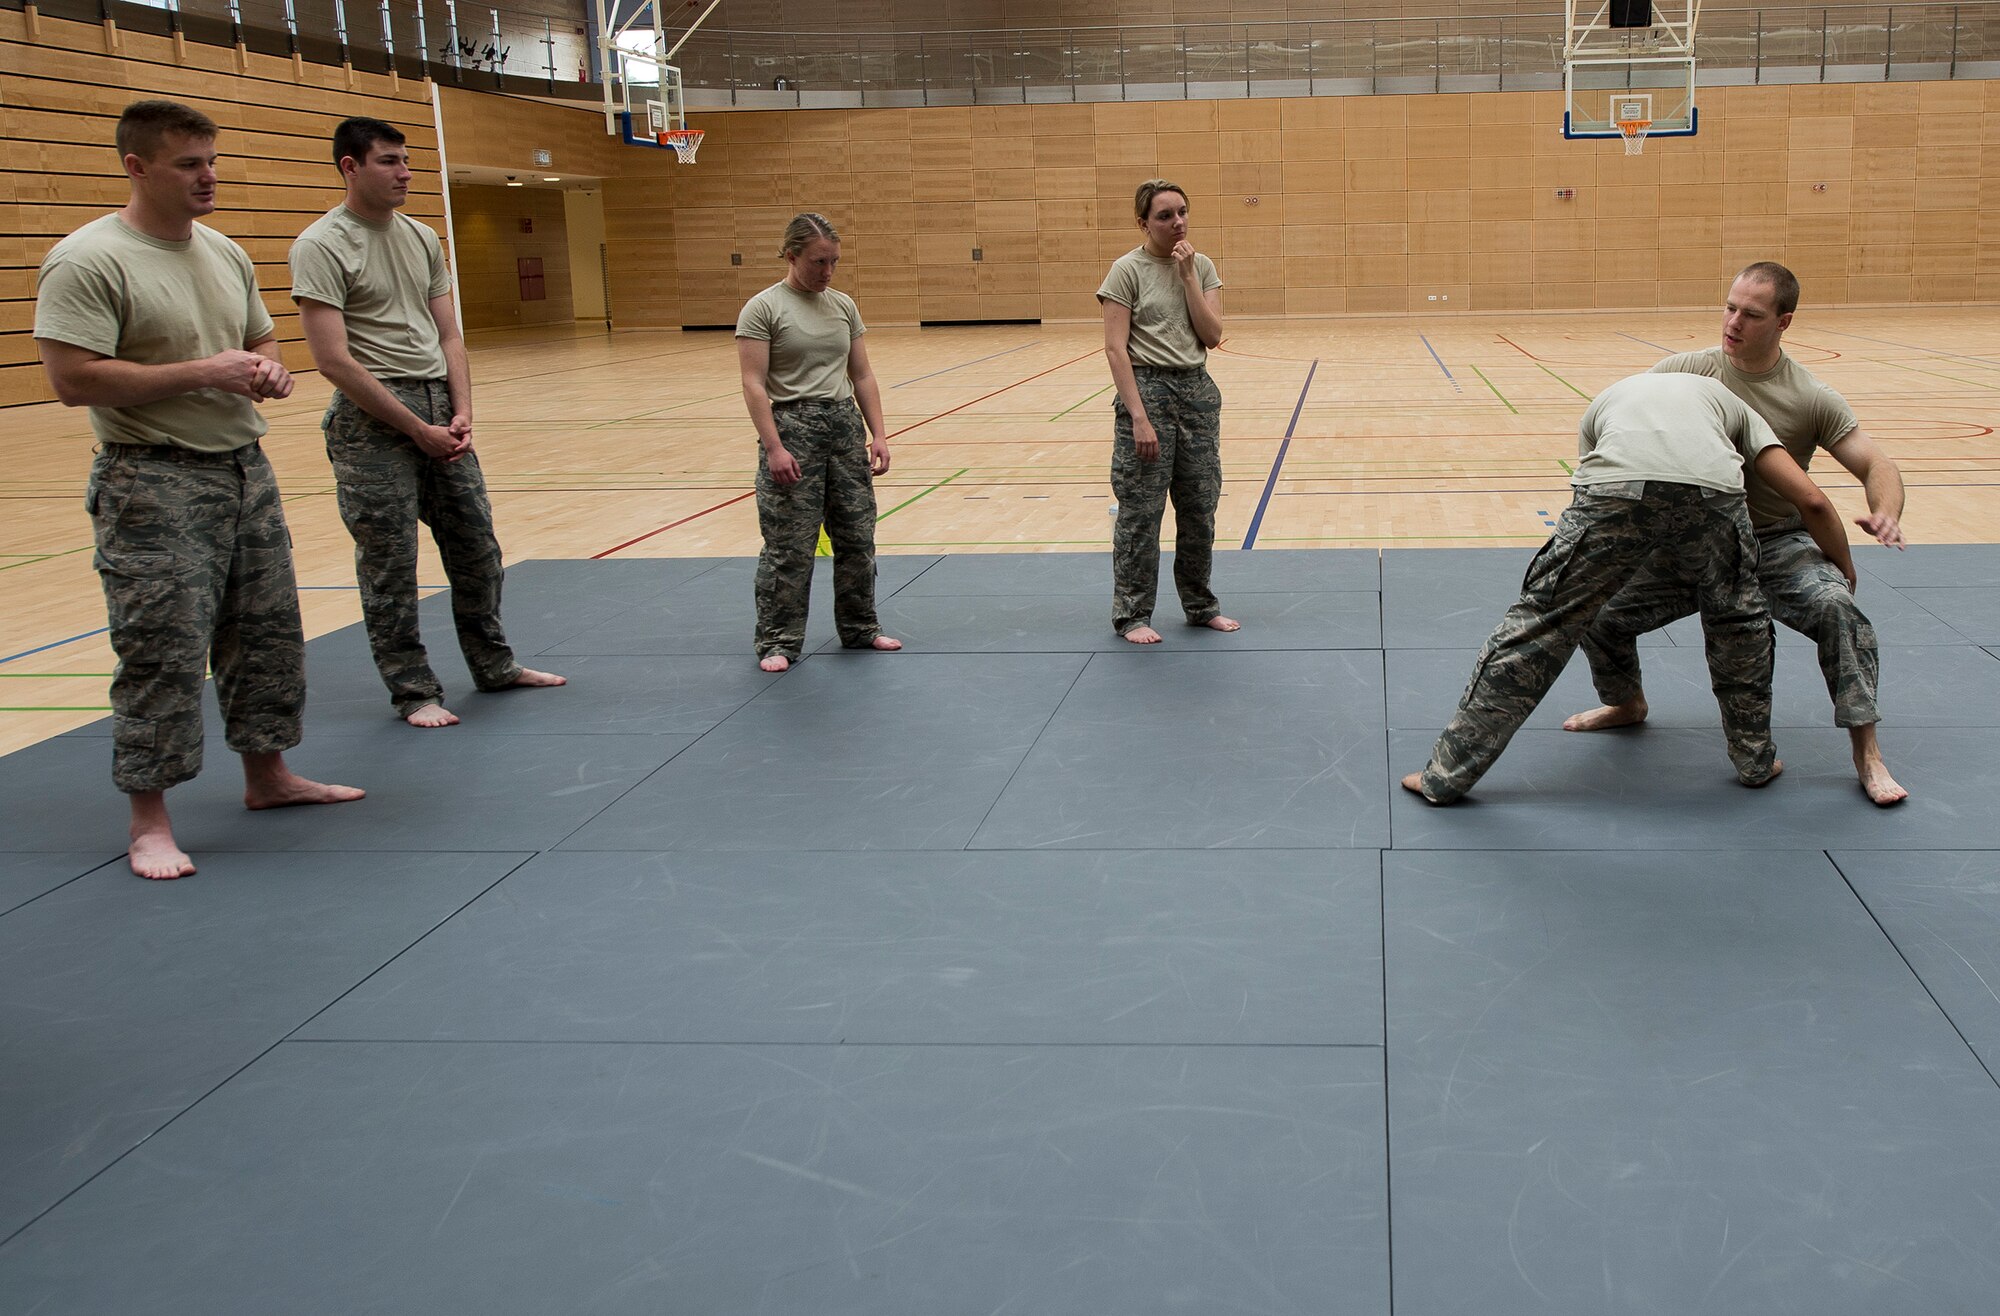 U.S. Air Force Senior Airman Erik Alter, 52nd Security Forces Squadron lead combatives instructor, demonstrates a technique to Airmen from the 52nd SFS during combatives training May 28, 2015 at the fitness center on Spangdahlem Air Base, Germany. All law enforcement officers assigned to the 52nd SFS are required to complete basic hand-to-hand combat training, meant to prepare them for any unexpected encounters on the job. (U.S. Air Force photo by Staff Sgt. Chad Warren/Released)